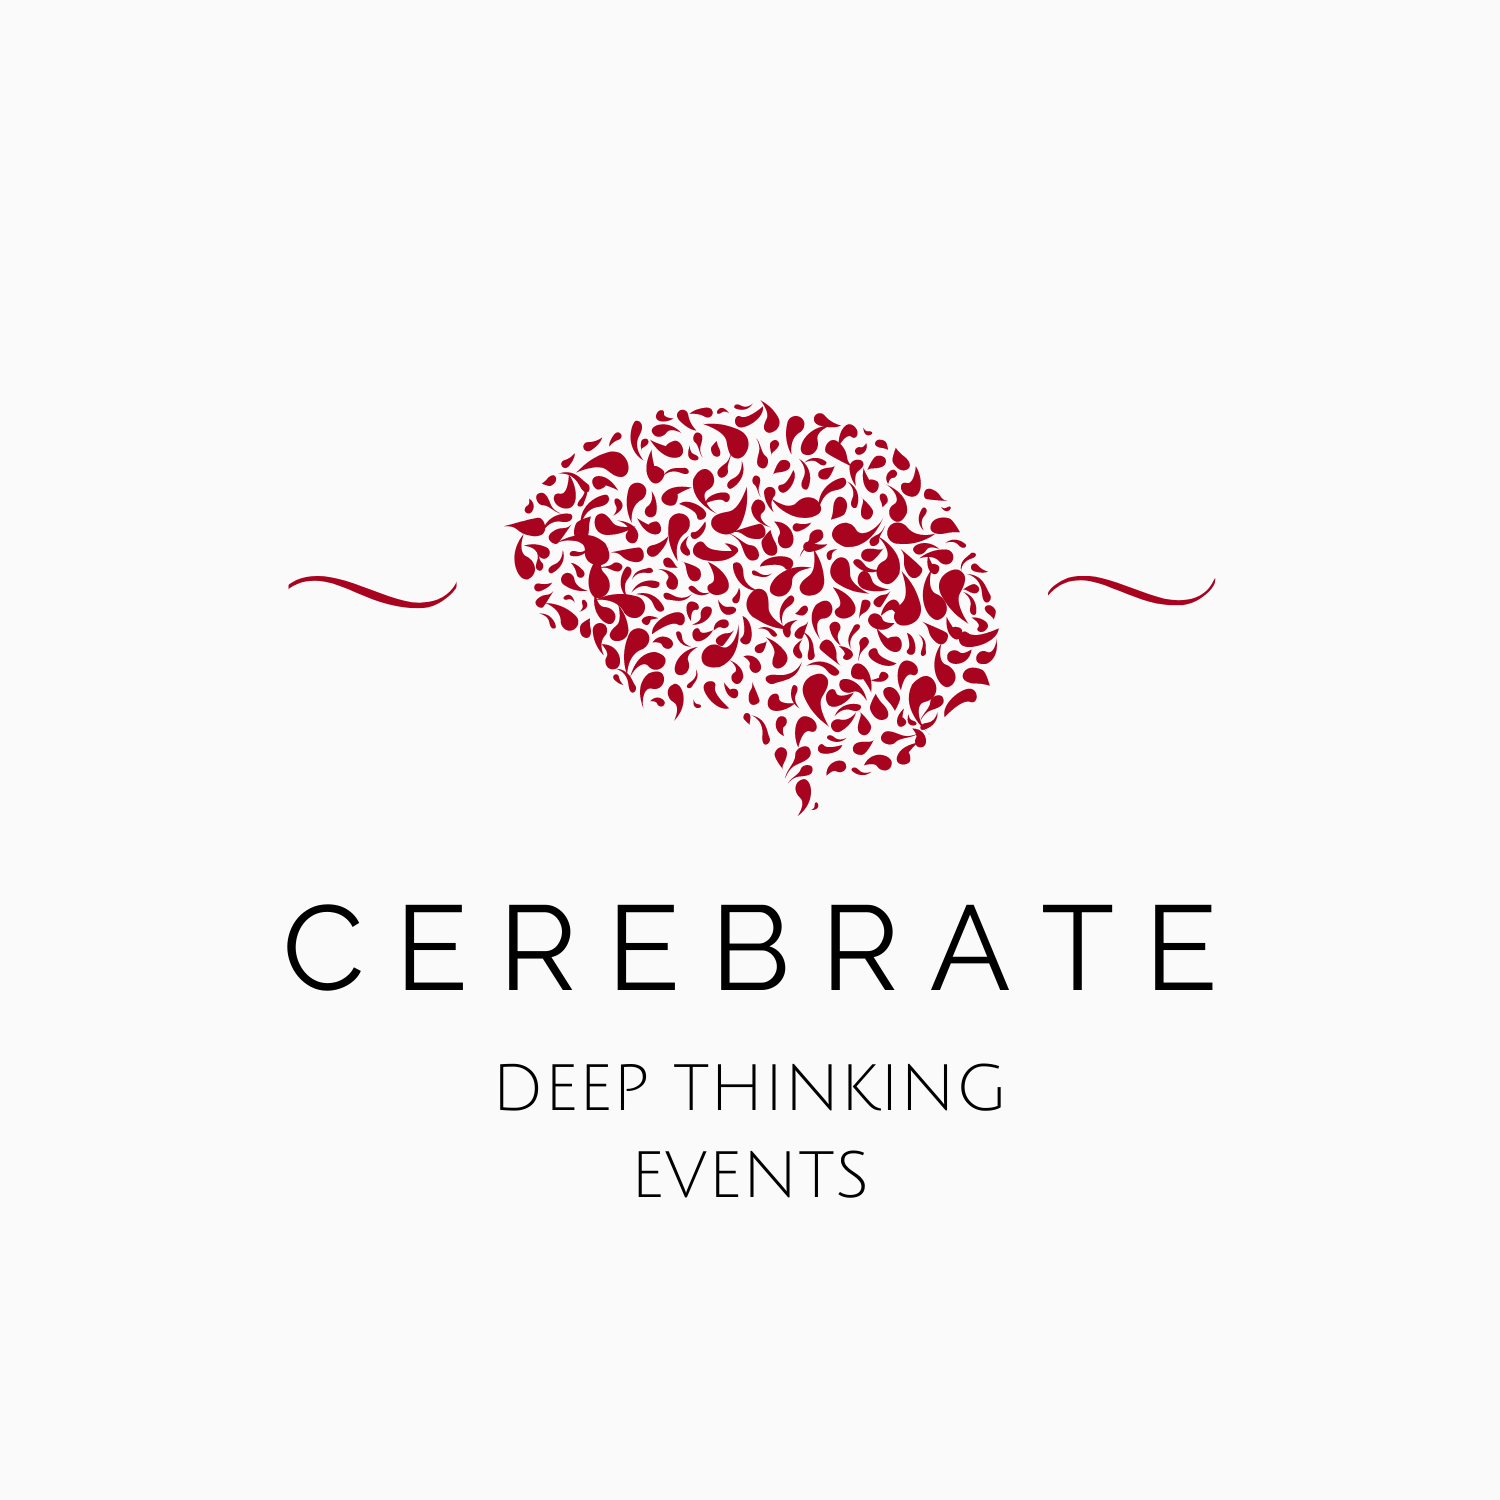 Cerebrate Deep Thinking Events